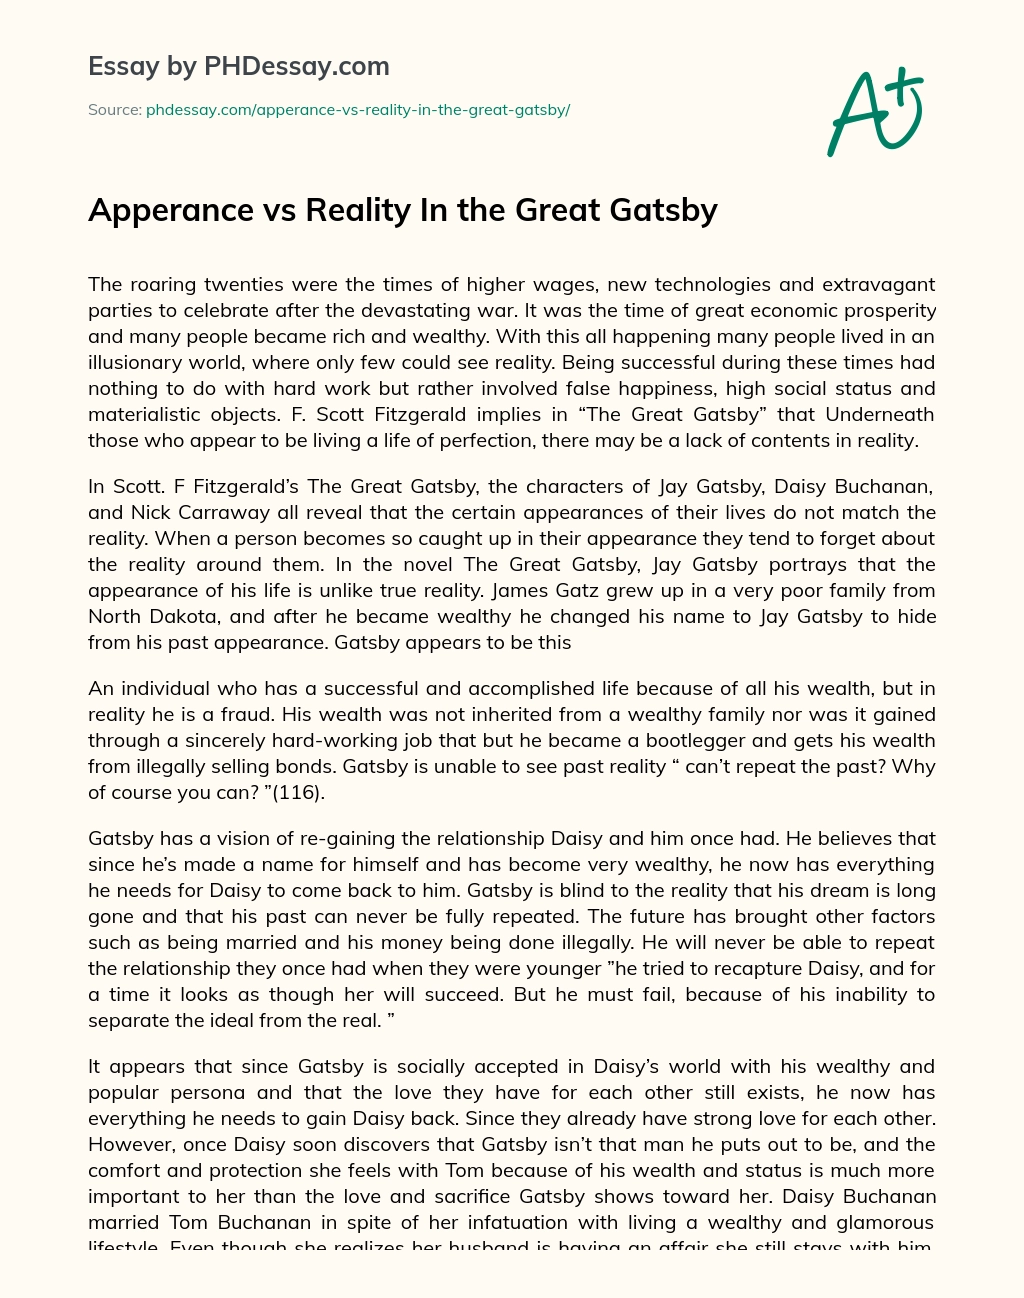 Apperance vs Reality In the Great Gatsby essay